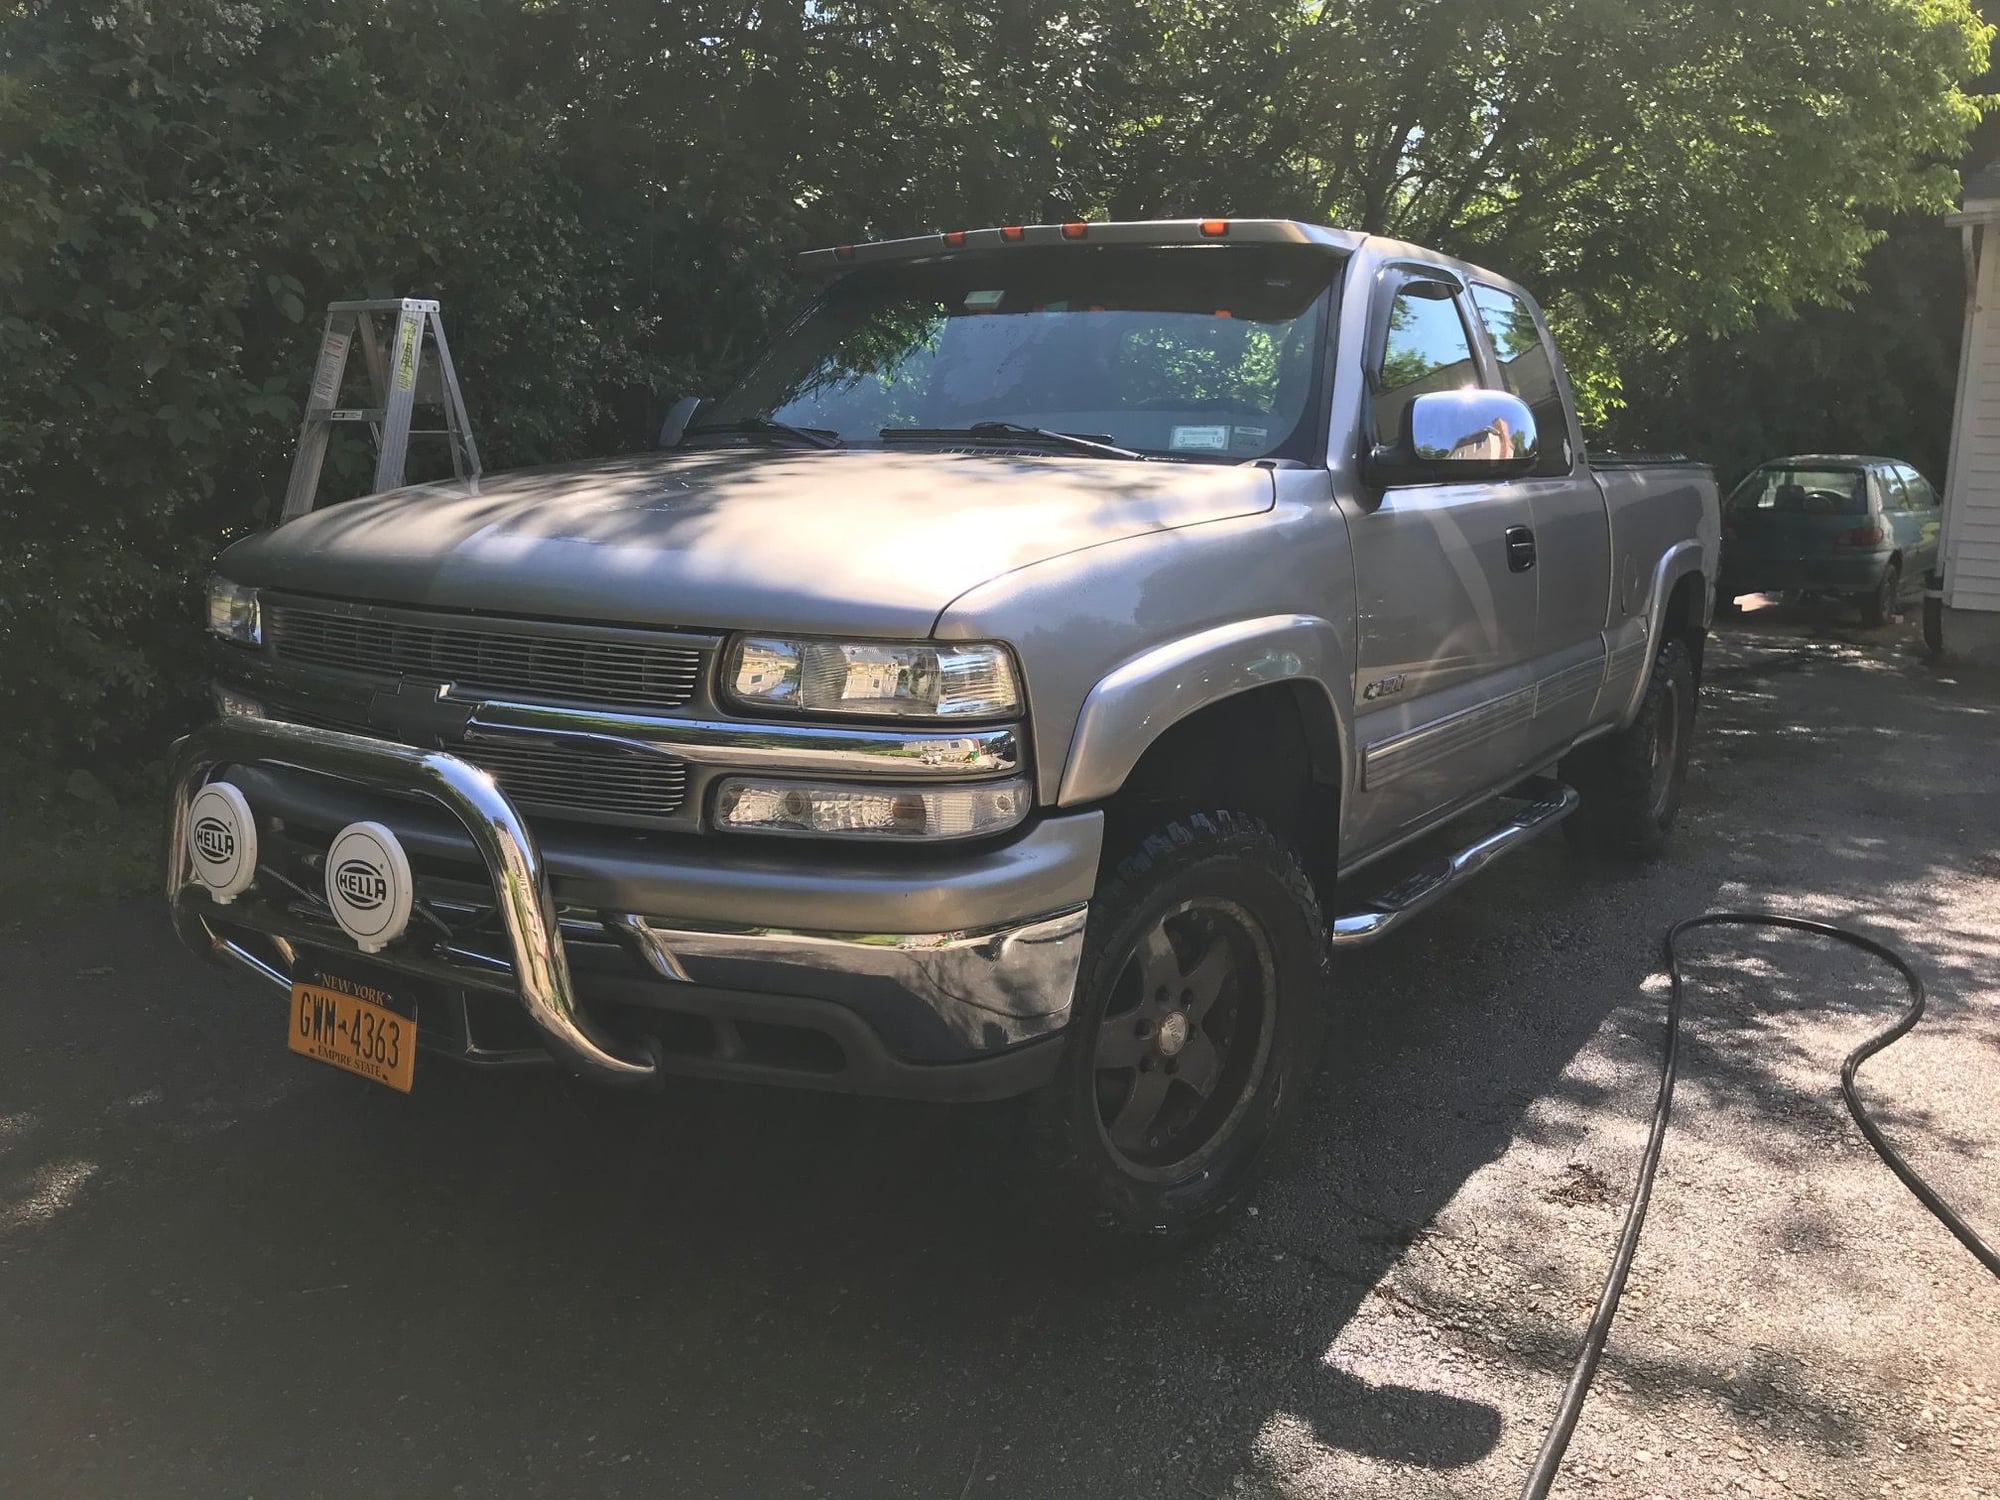 2000 Chevrolet Silverado 1500 - 2000 Silverado LS 4x4 Ext Cab Cammed 6.0 swap - Used - VIN 1GCEK19V2YE285447 - 155,000 Miles - 8 cyl - 4WD - Automatic - Truck - Gold - Wappingers Falls, NY 12590, United States